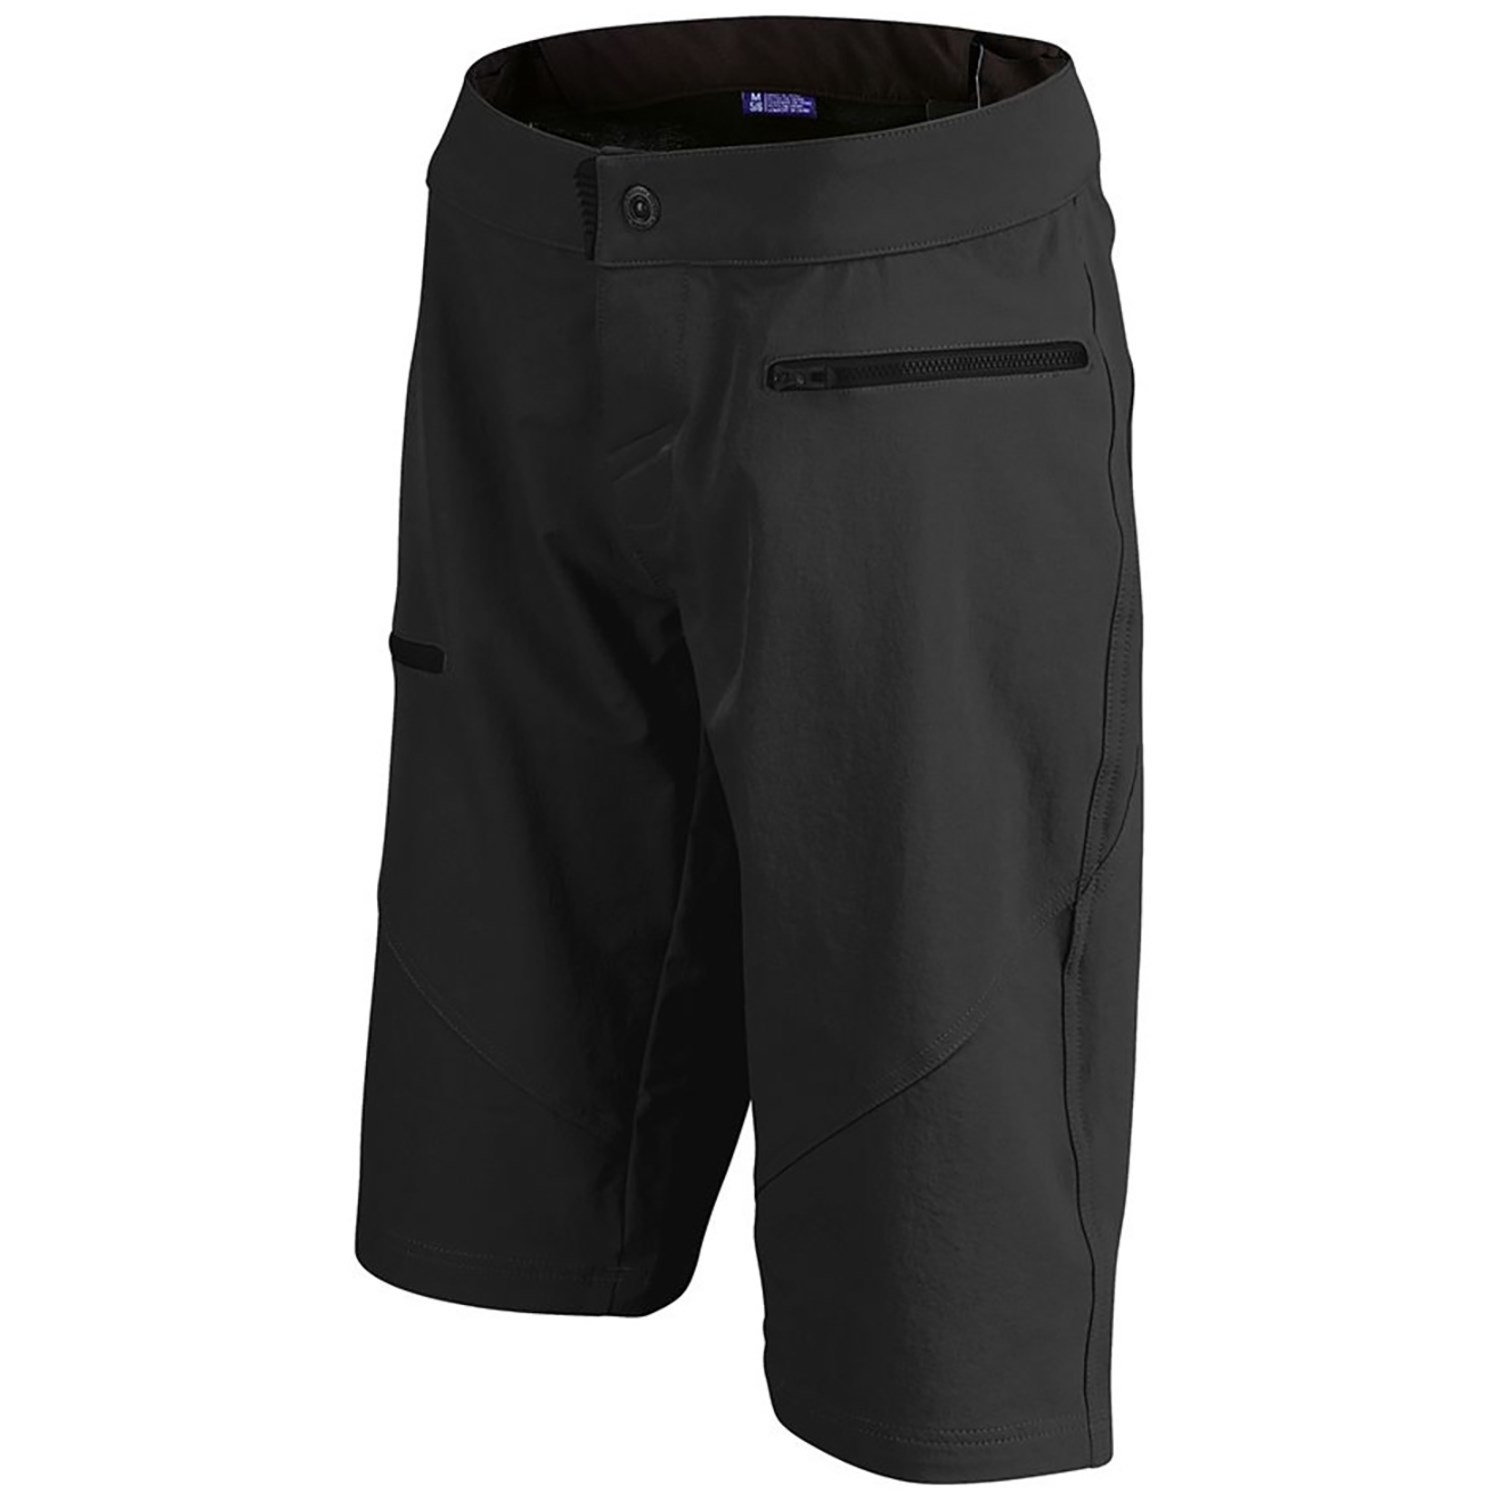 troy lee designs ruckus shorts review